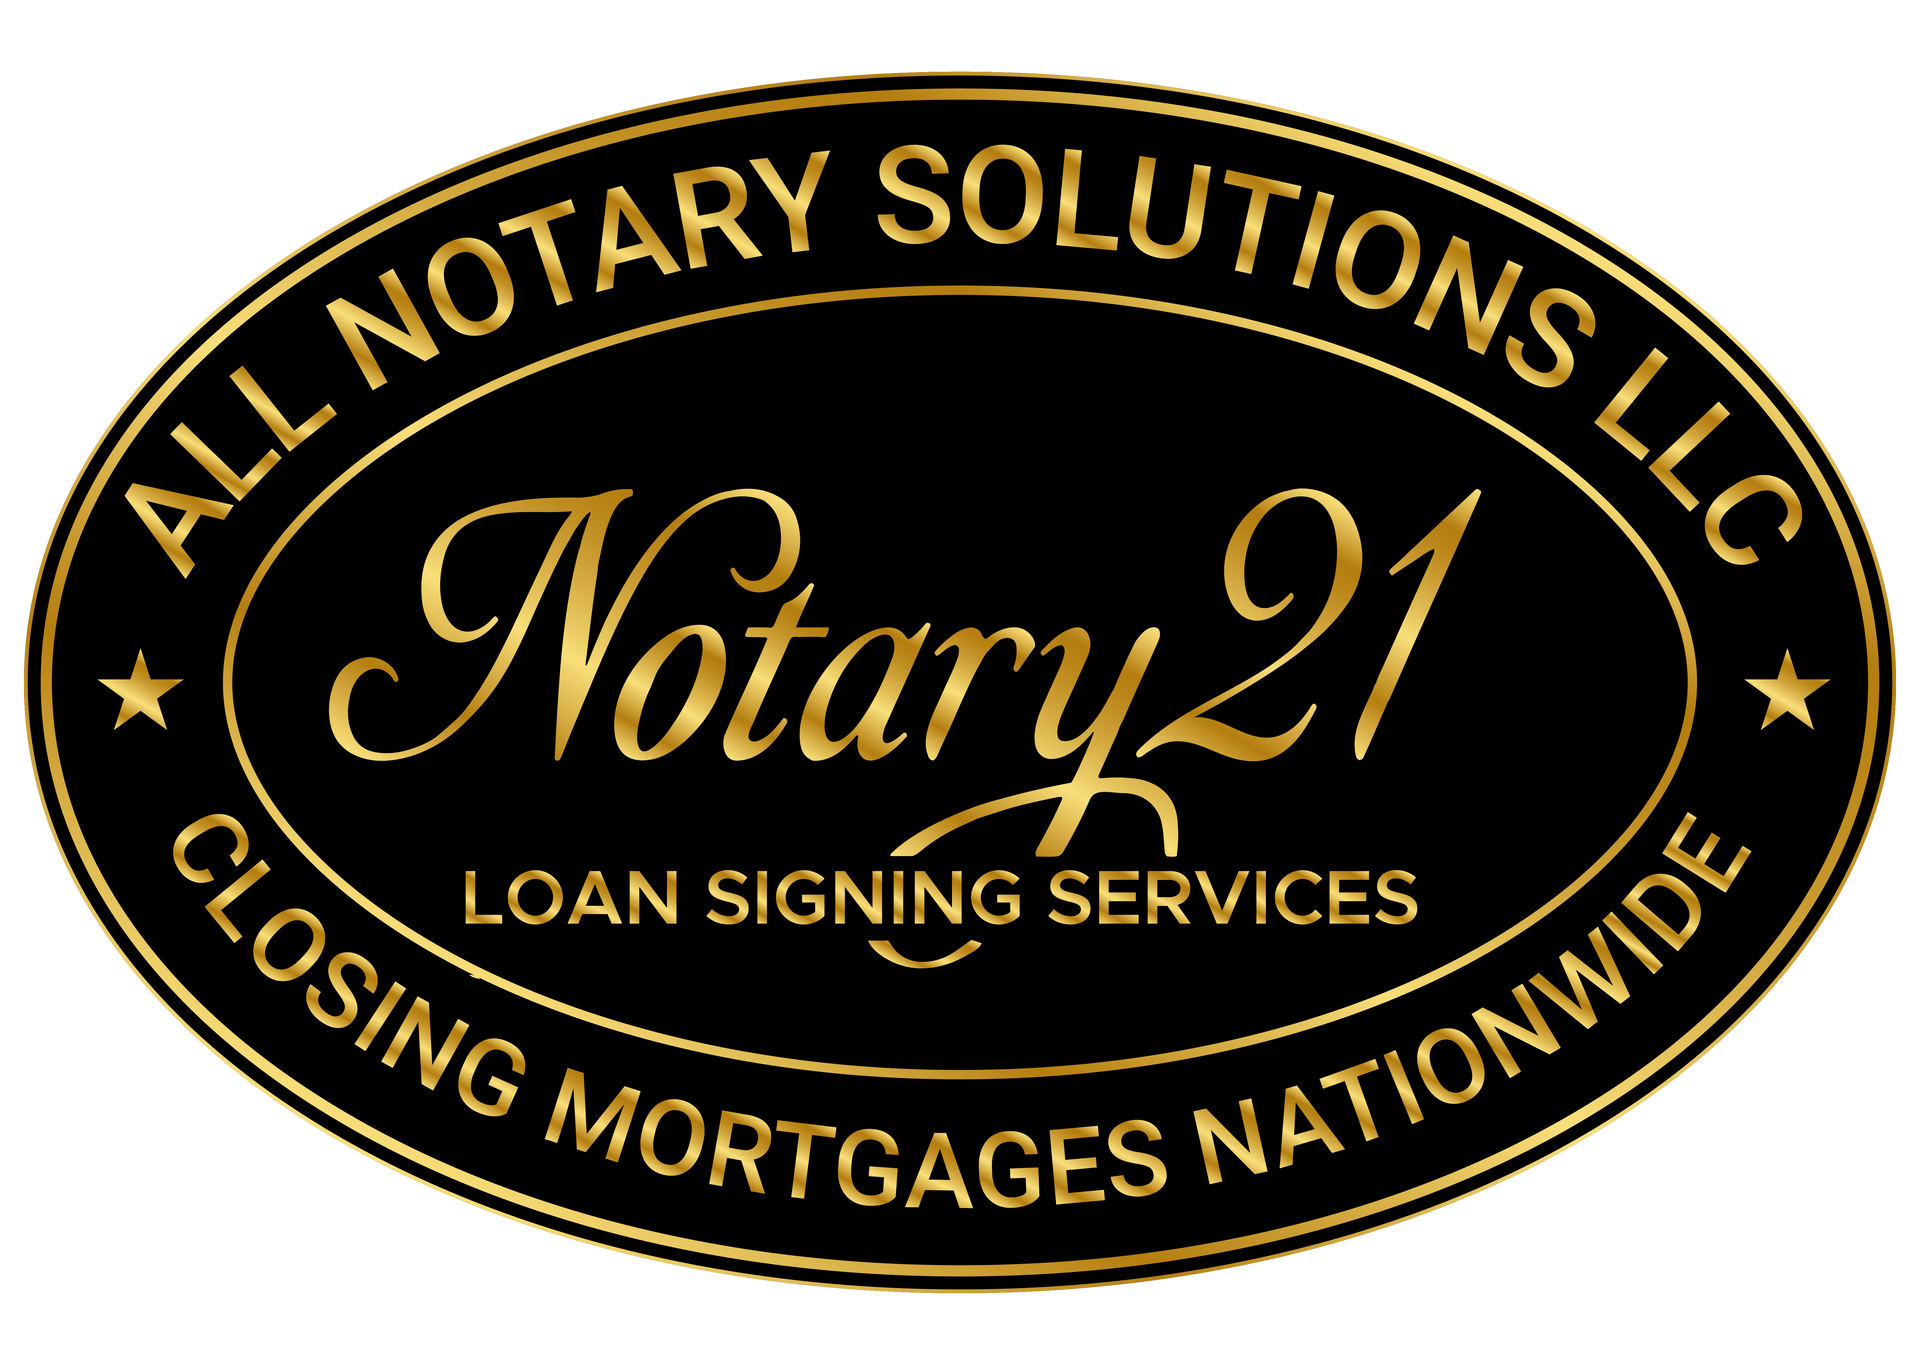 All Notary Solutions LLC